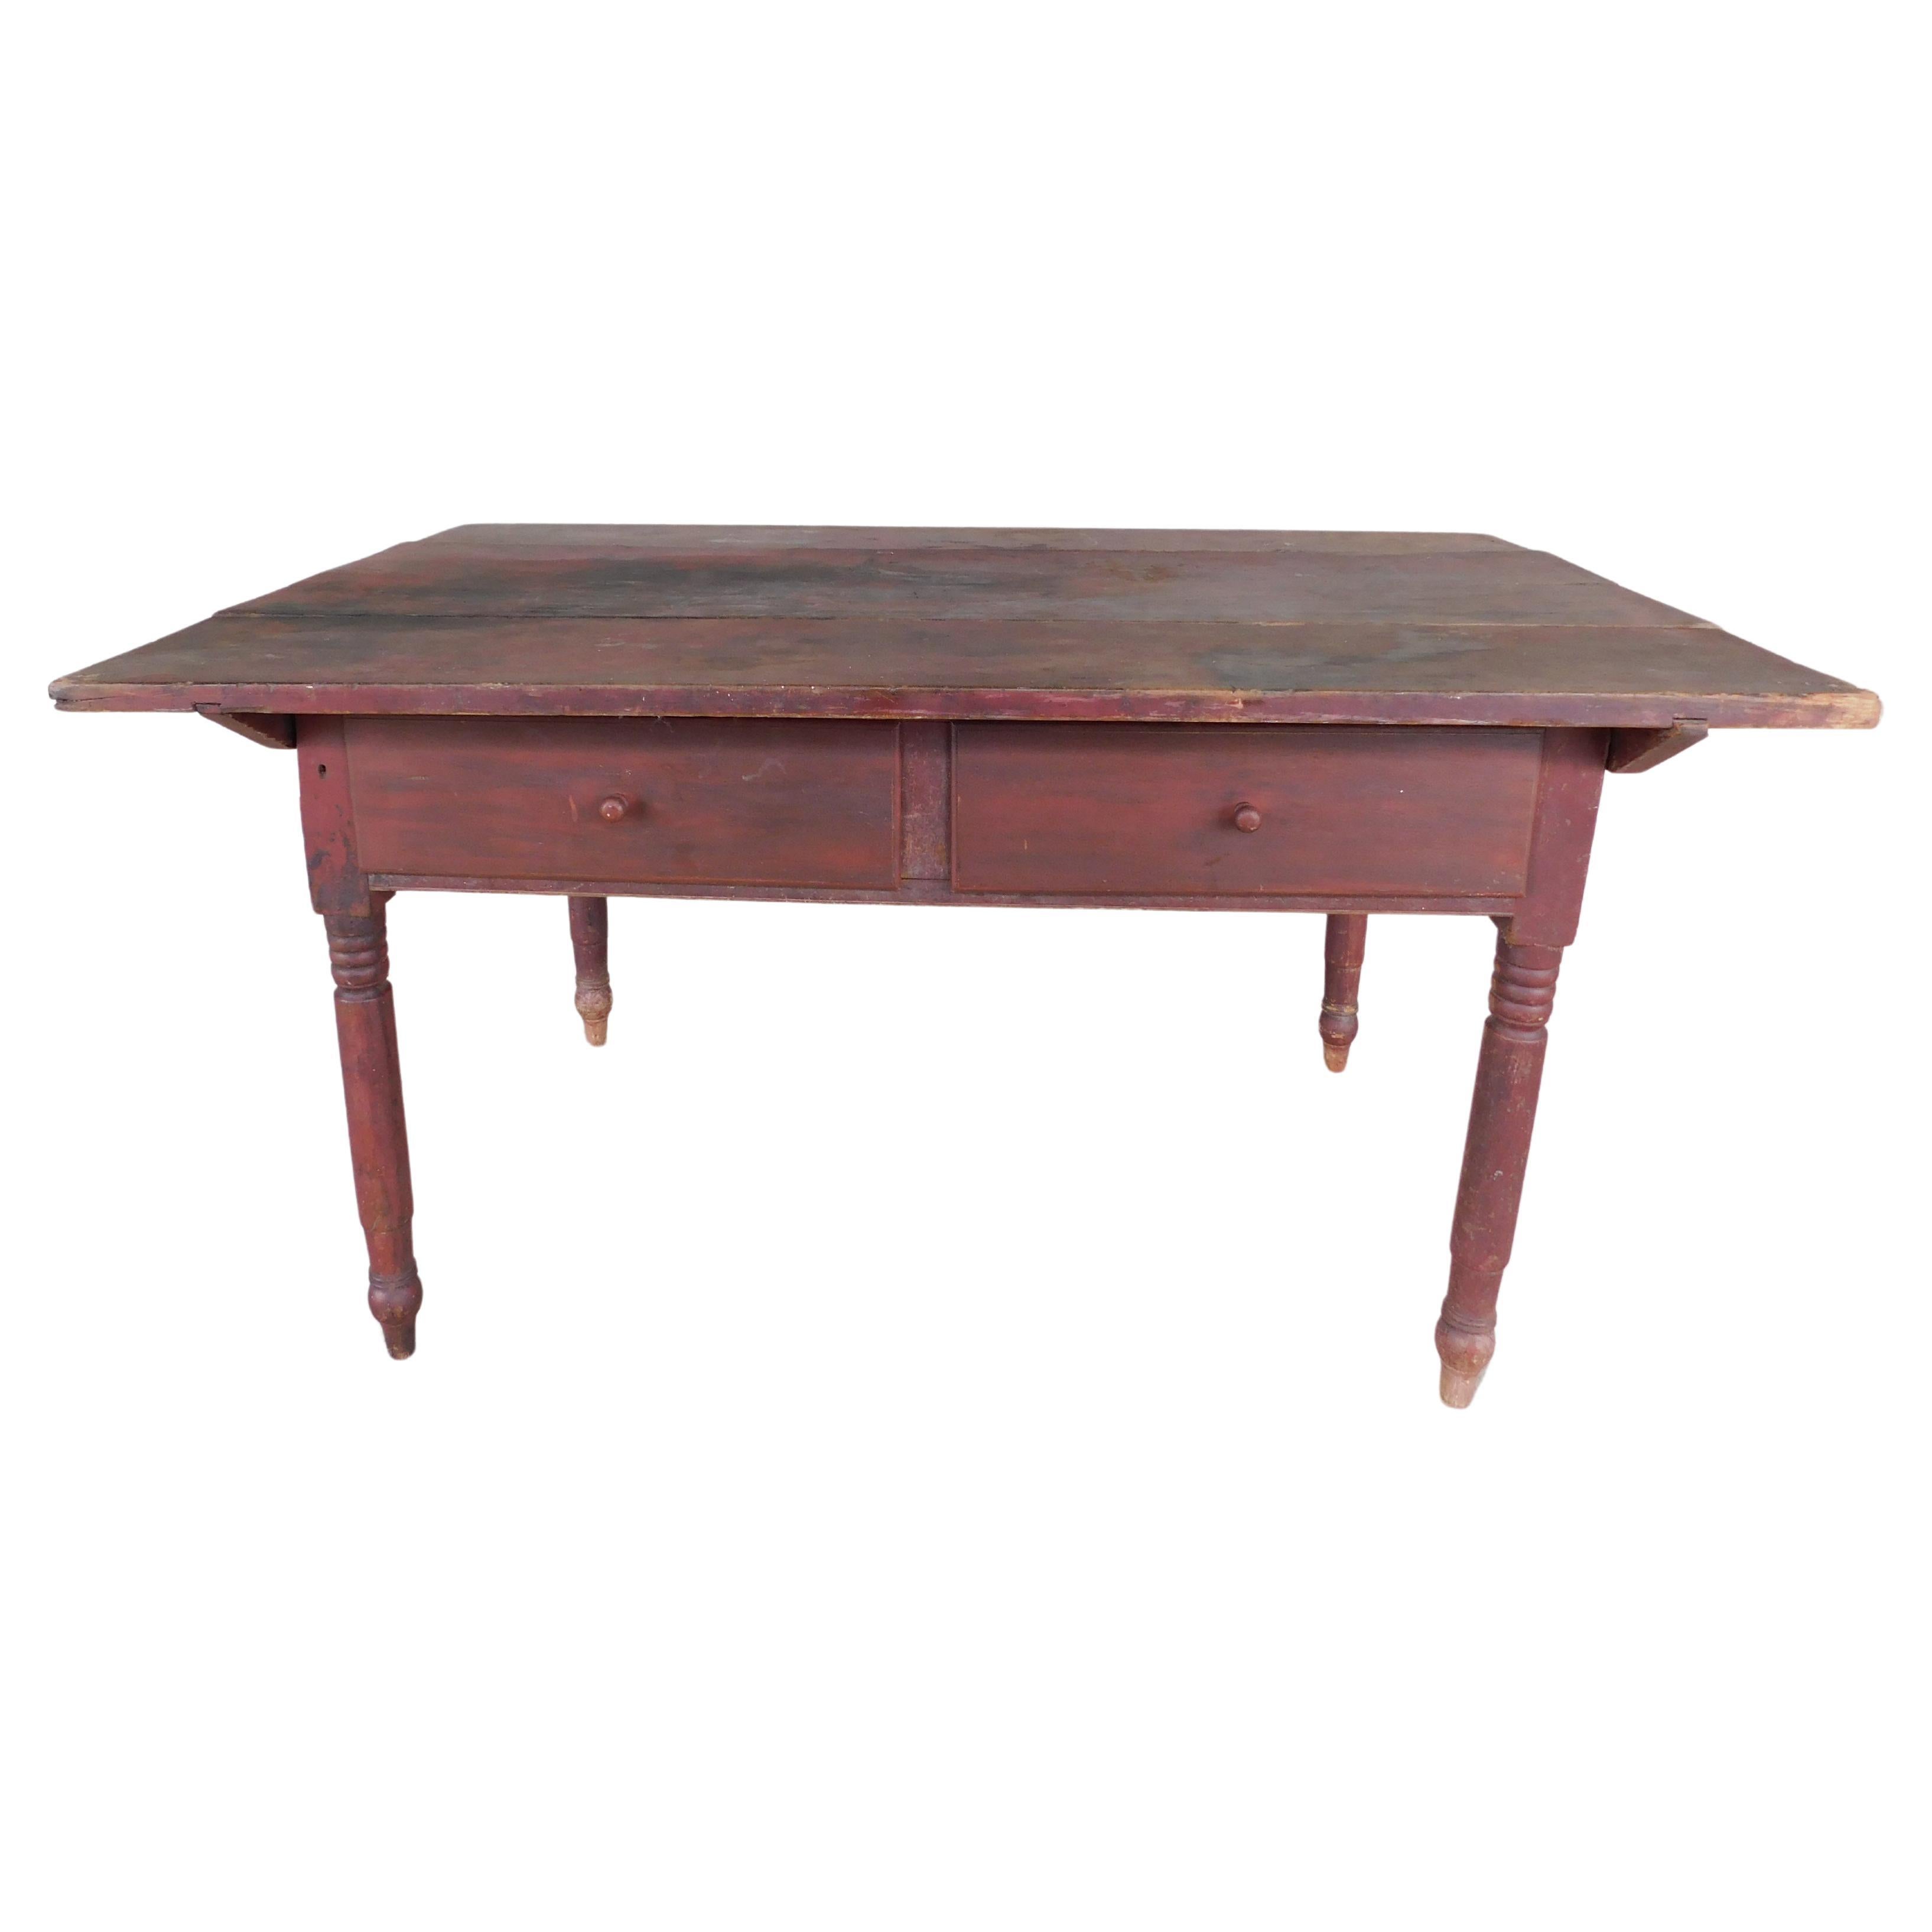 Antique 19th Century Tavern Work Dining Table For Sale